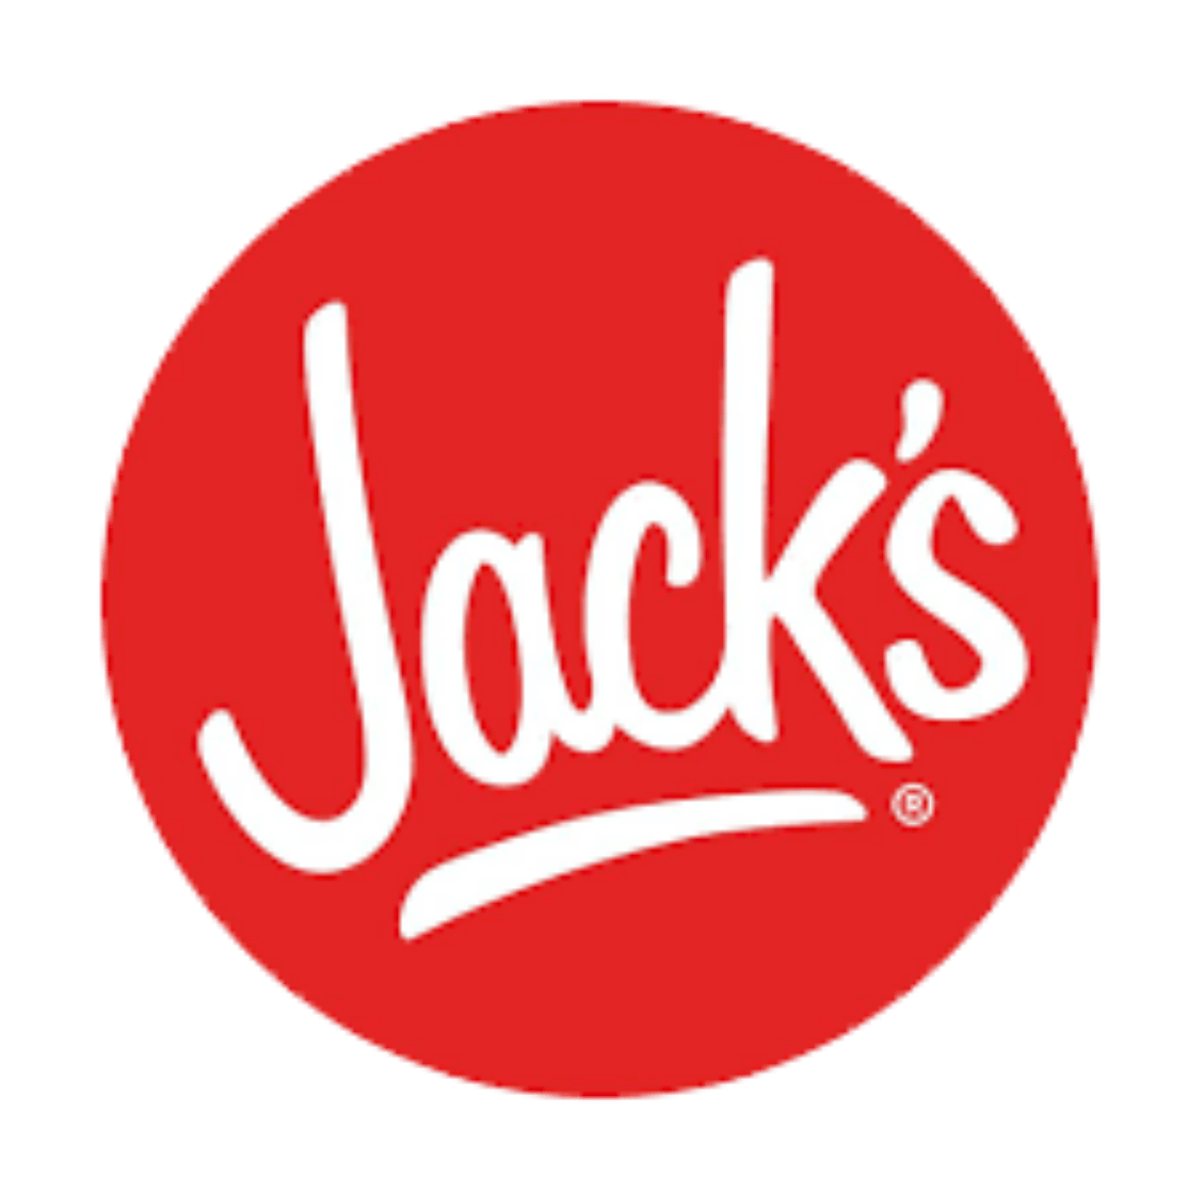 5 Leters Red and Yellow Burger Logo - Jack's